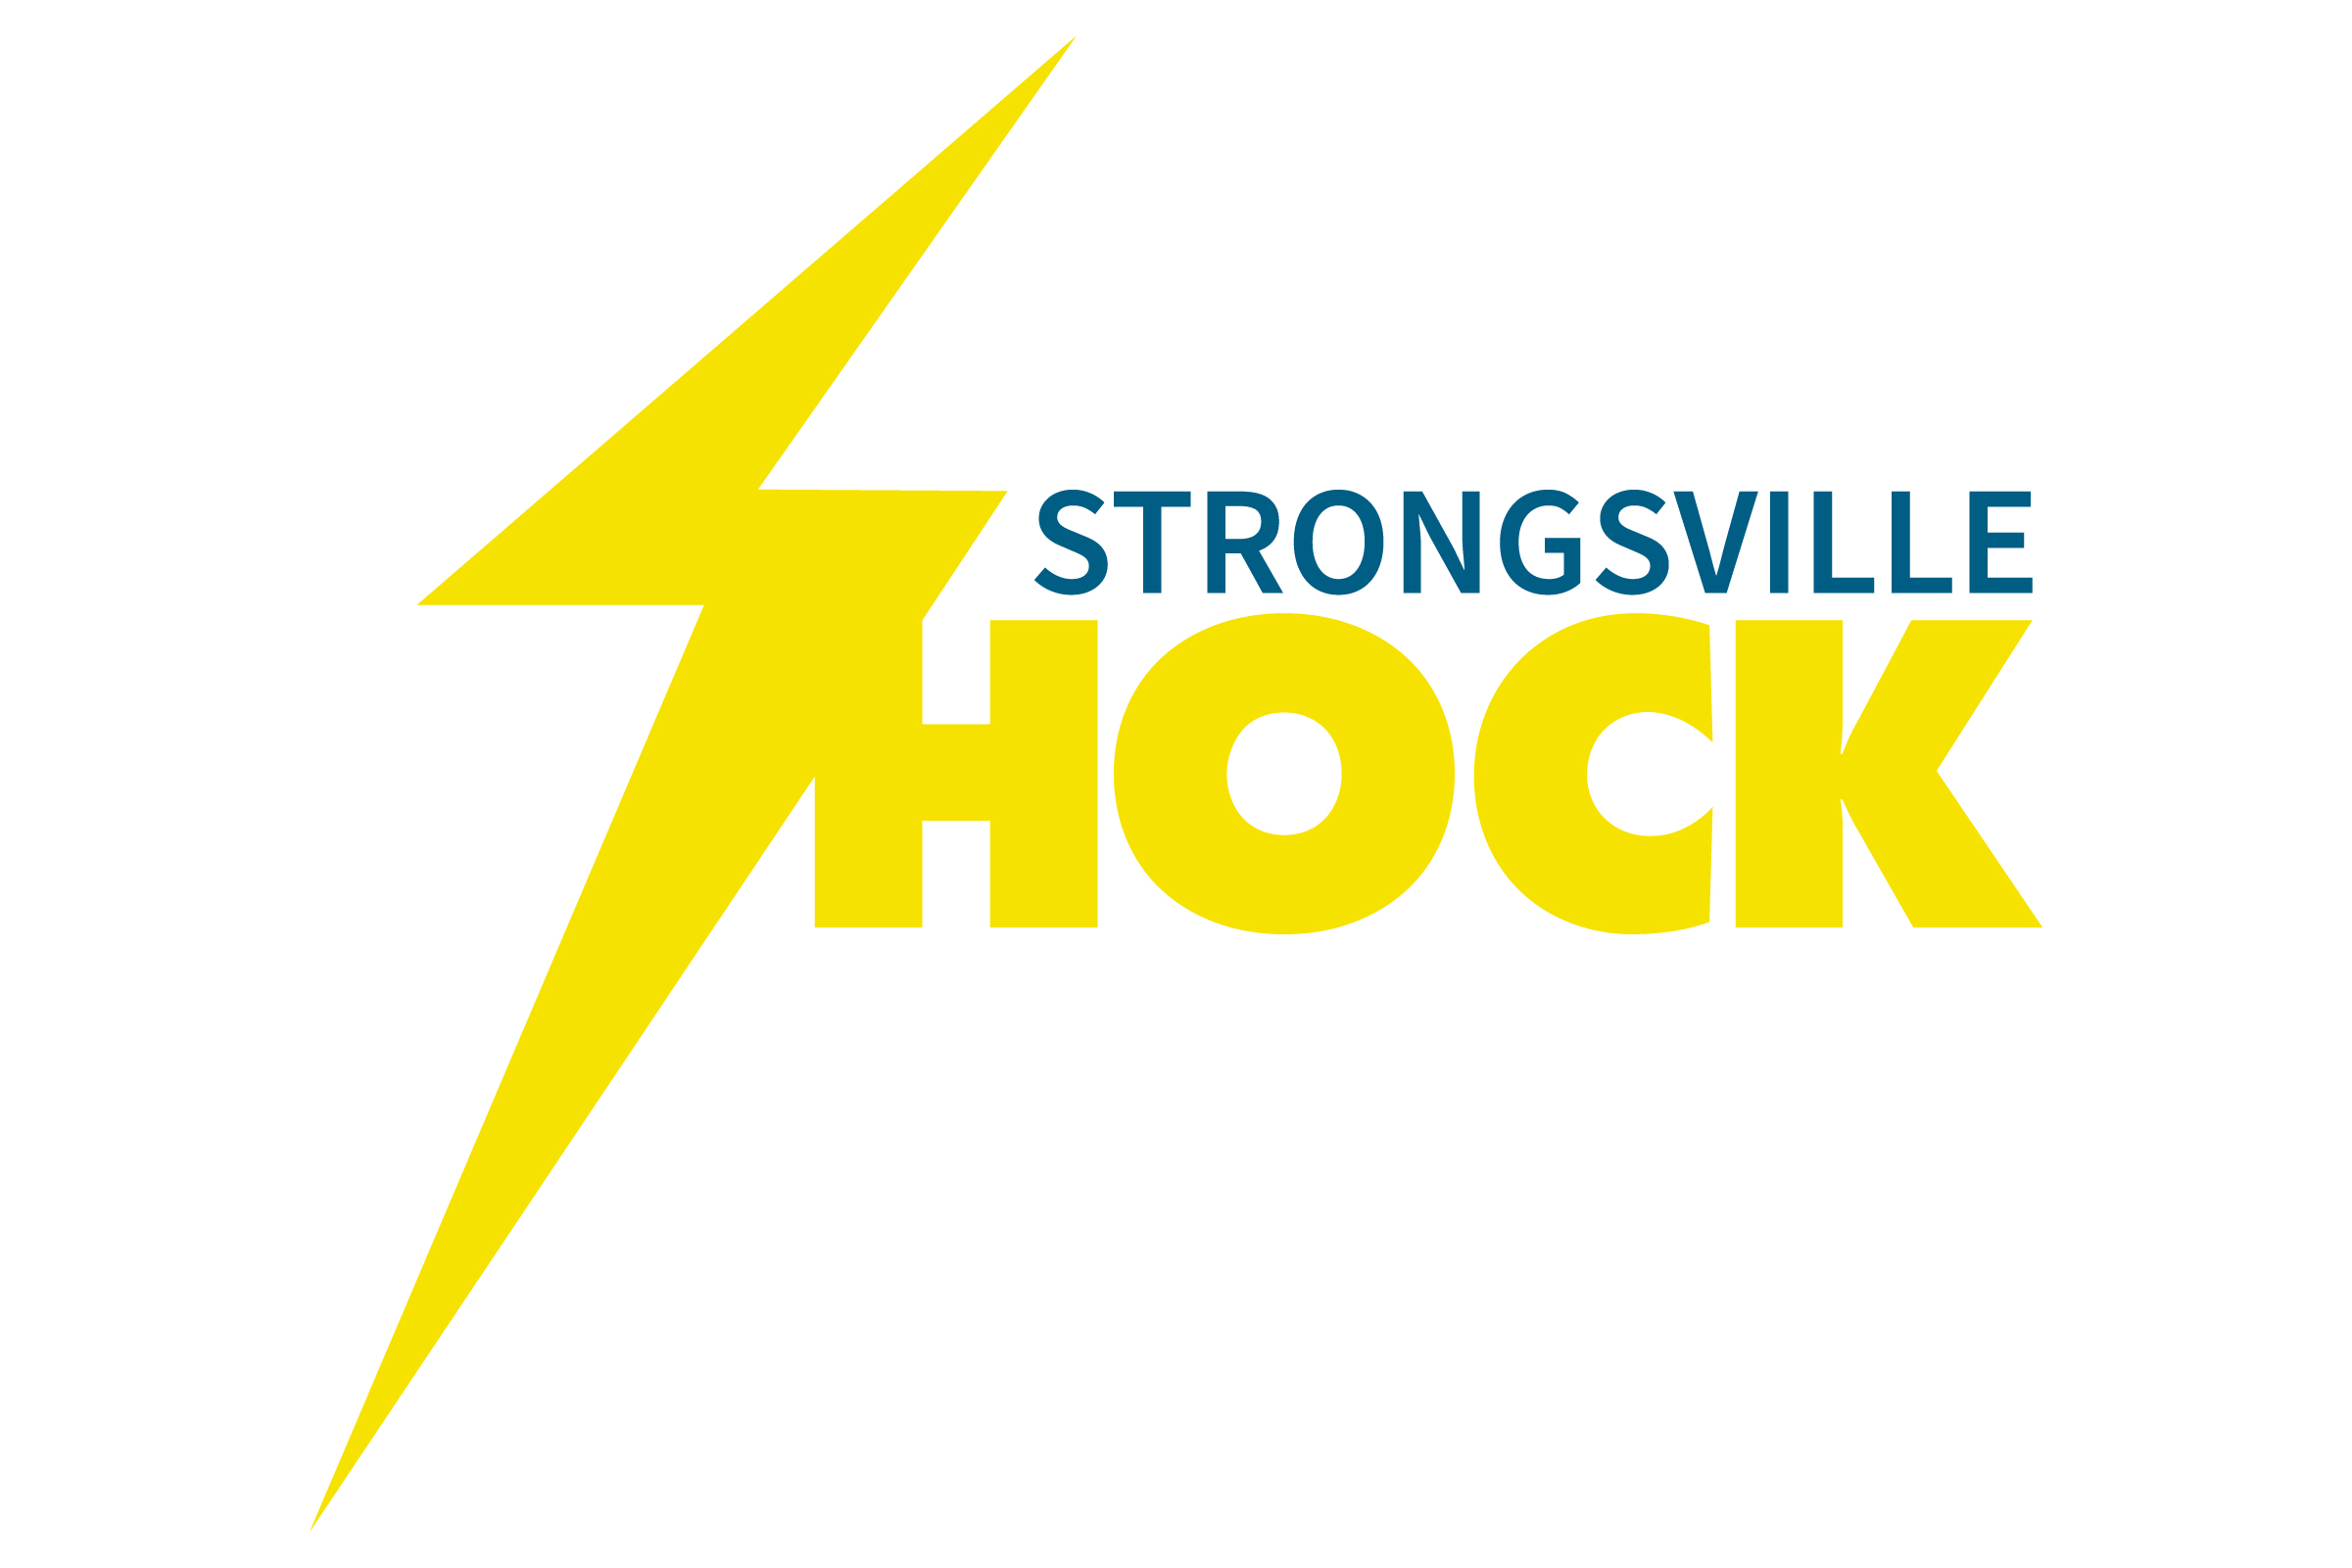 Final Version of the Strongsville Shock Primary Logo